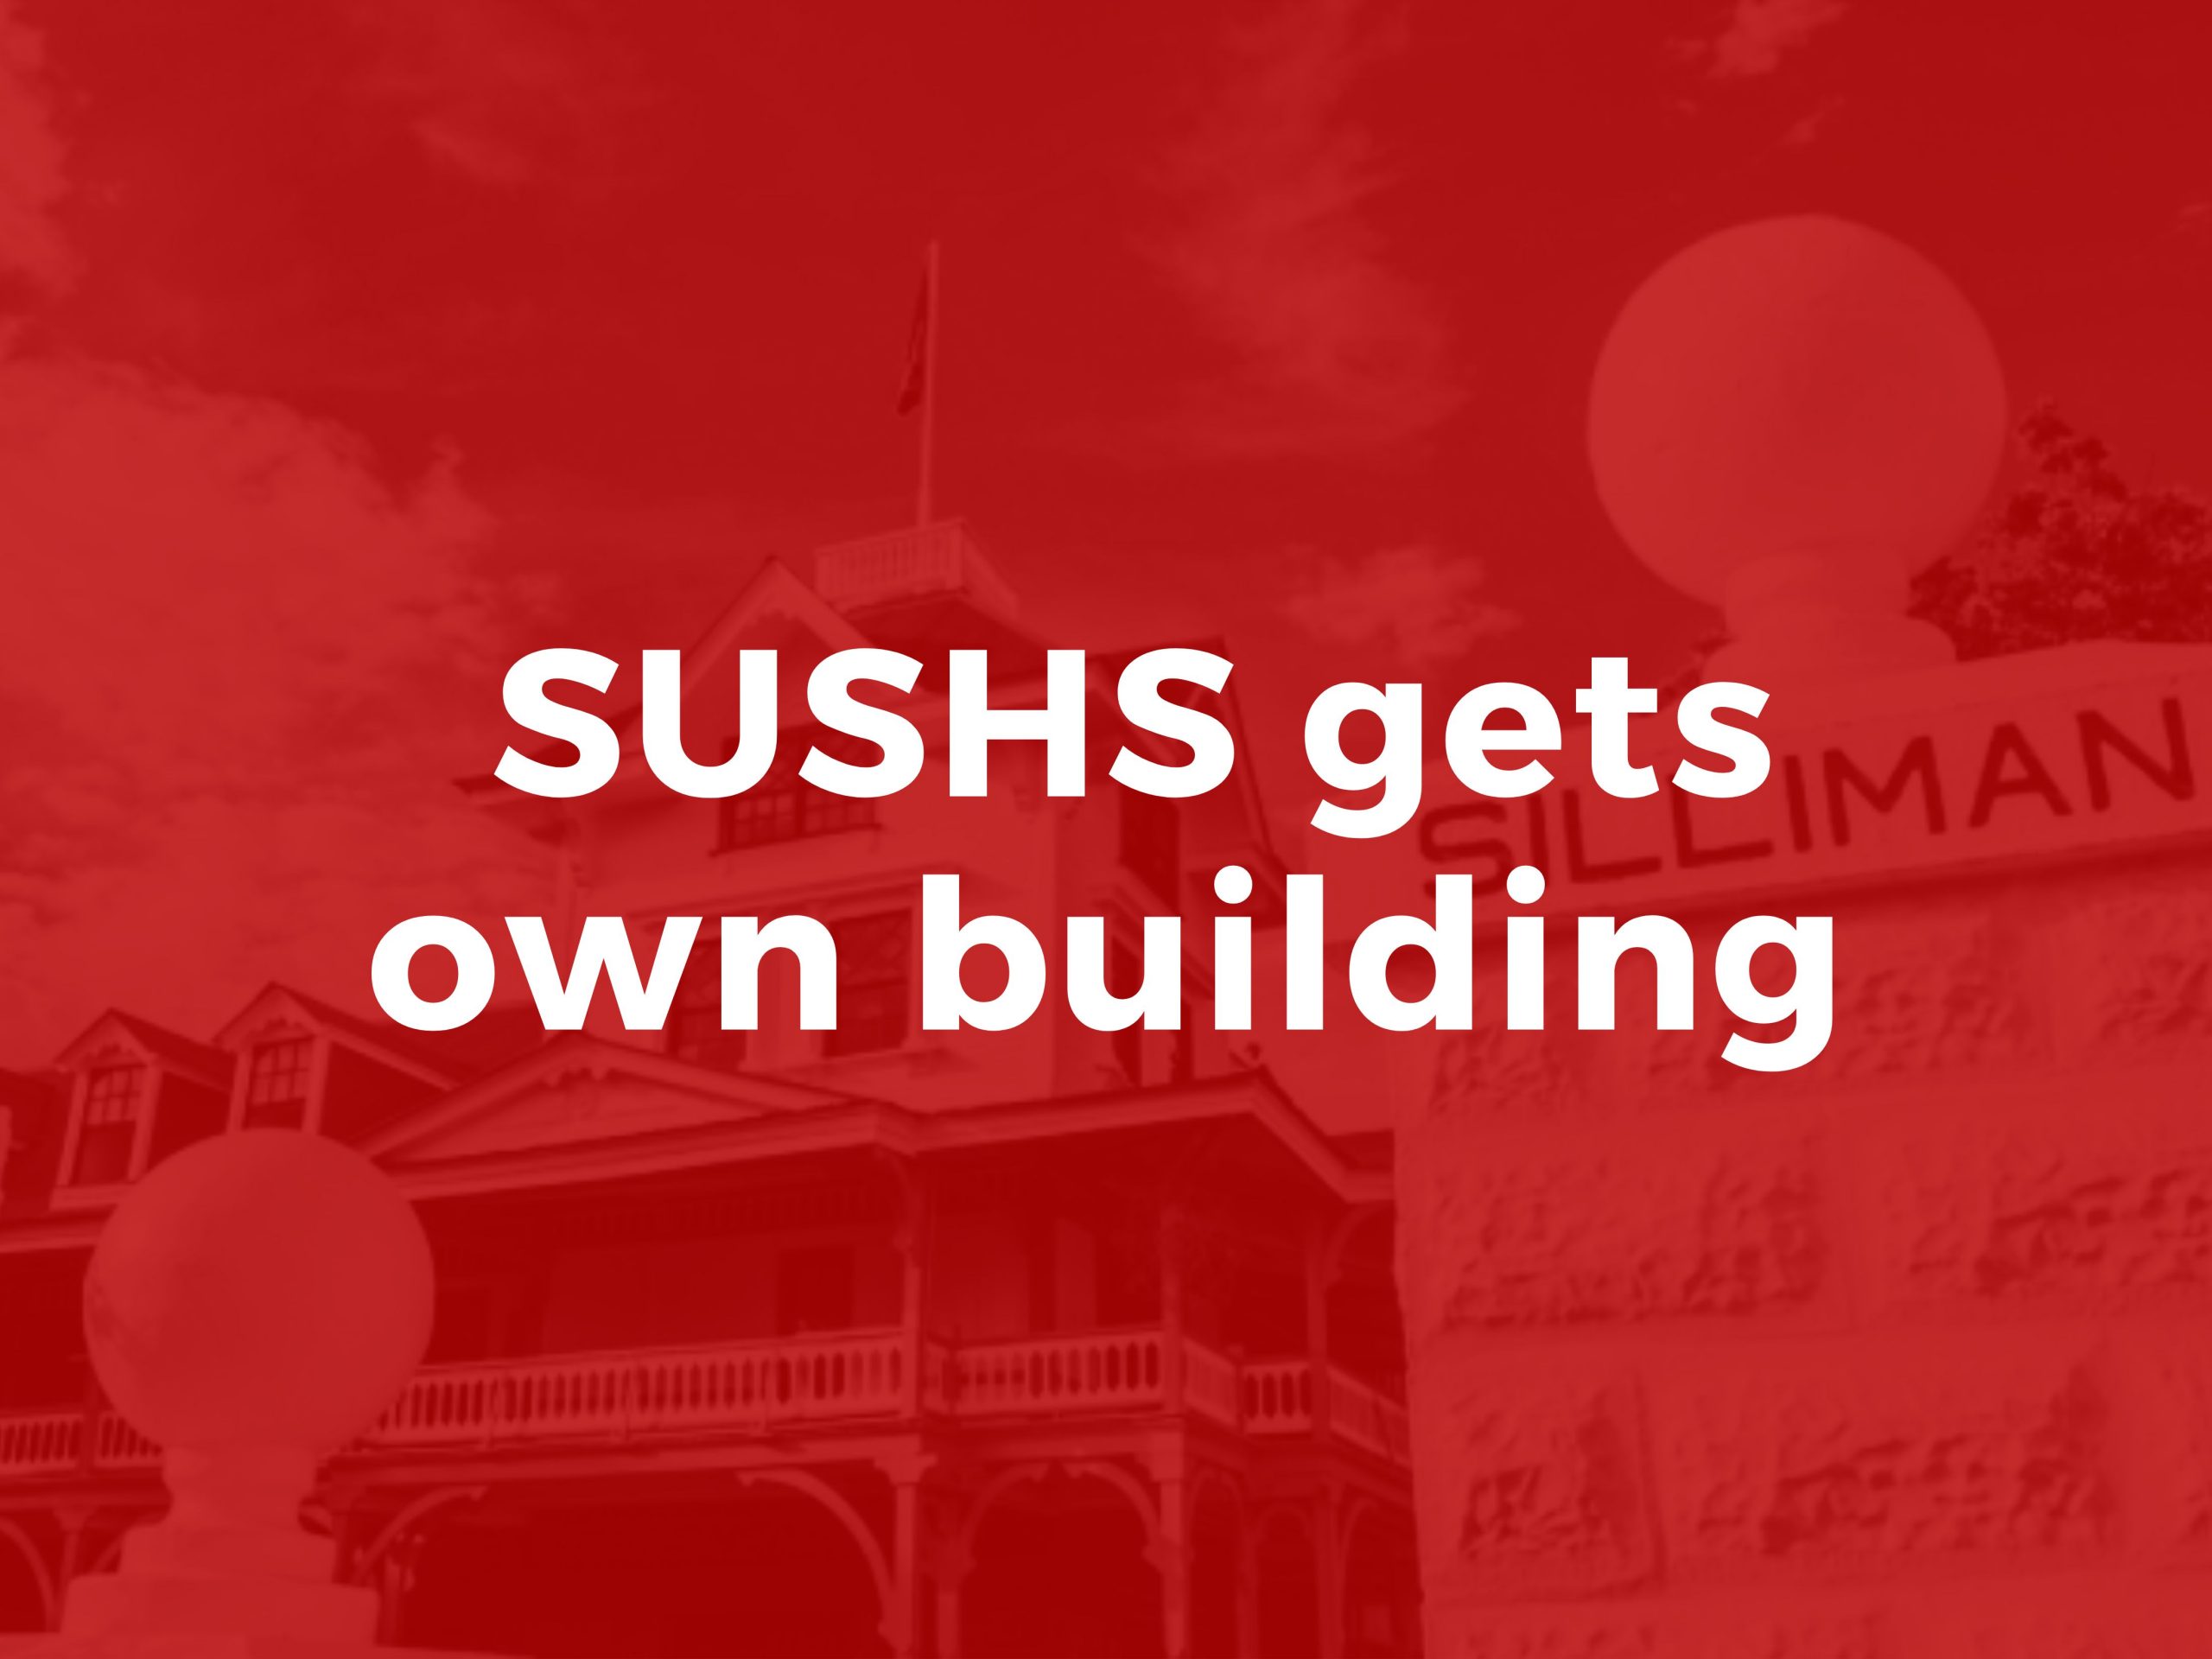 SUSHS gets own building